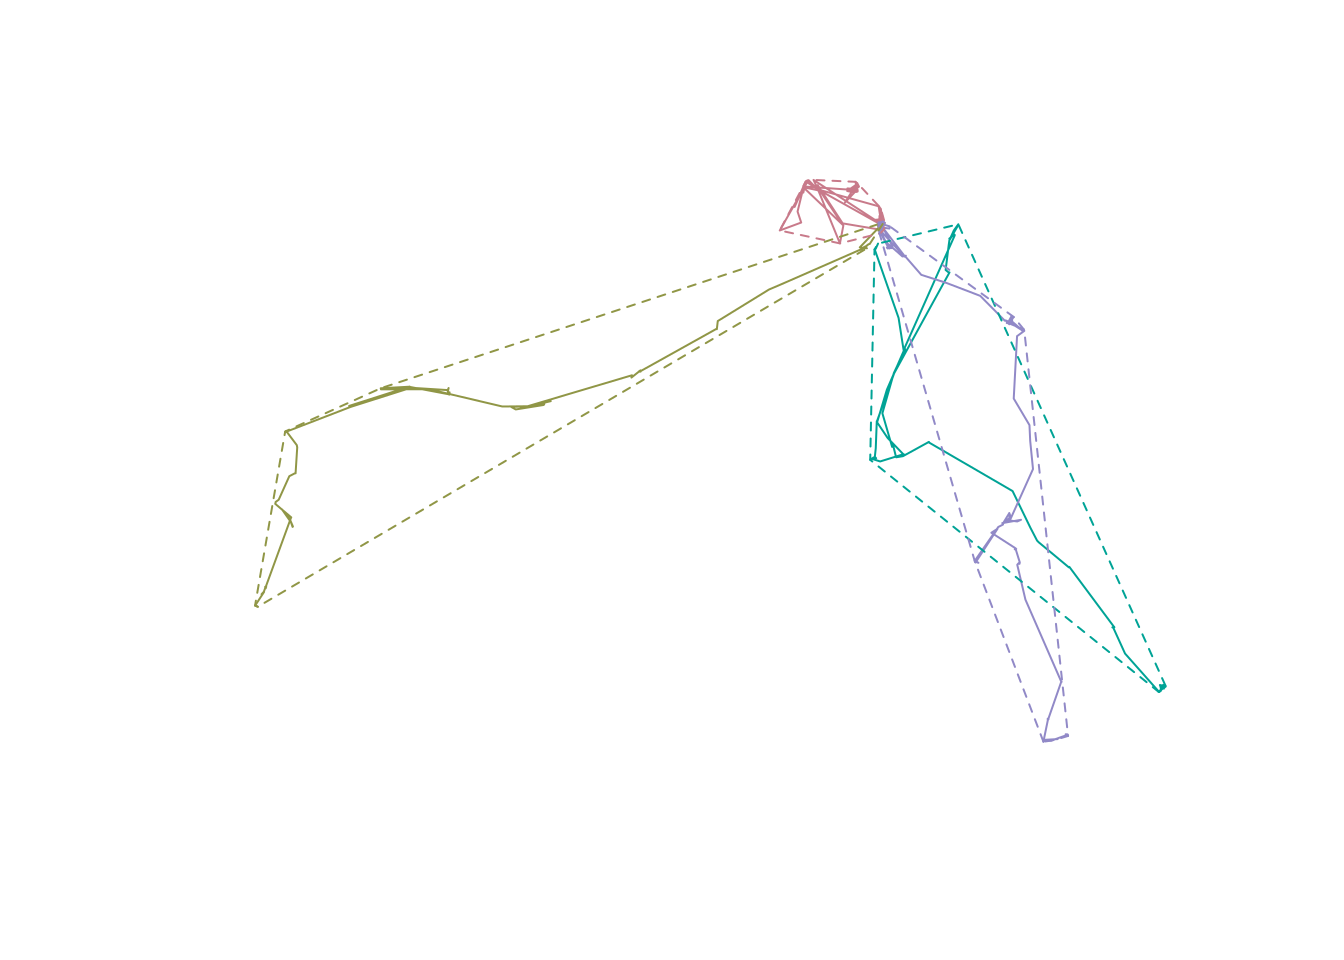 Trajectories and convex hull polygons of four elks